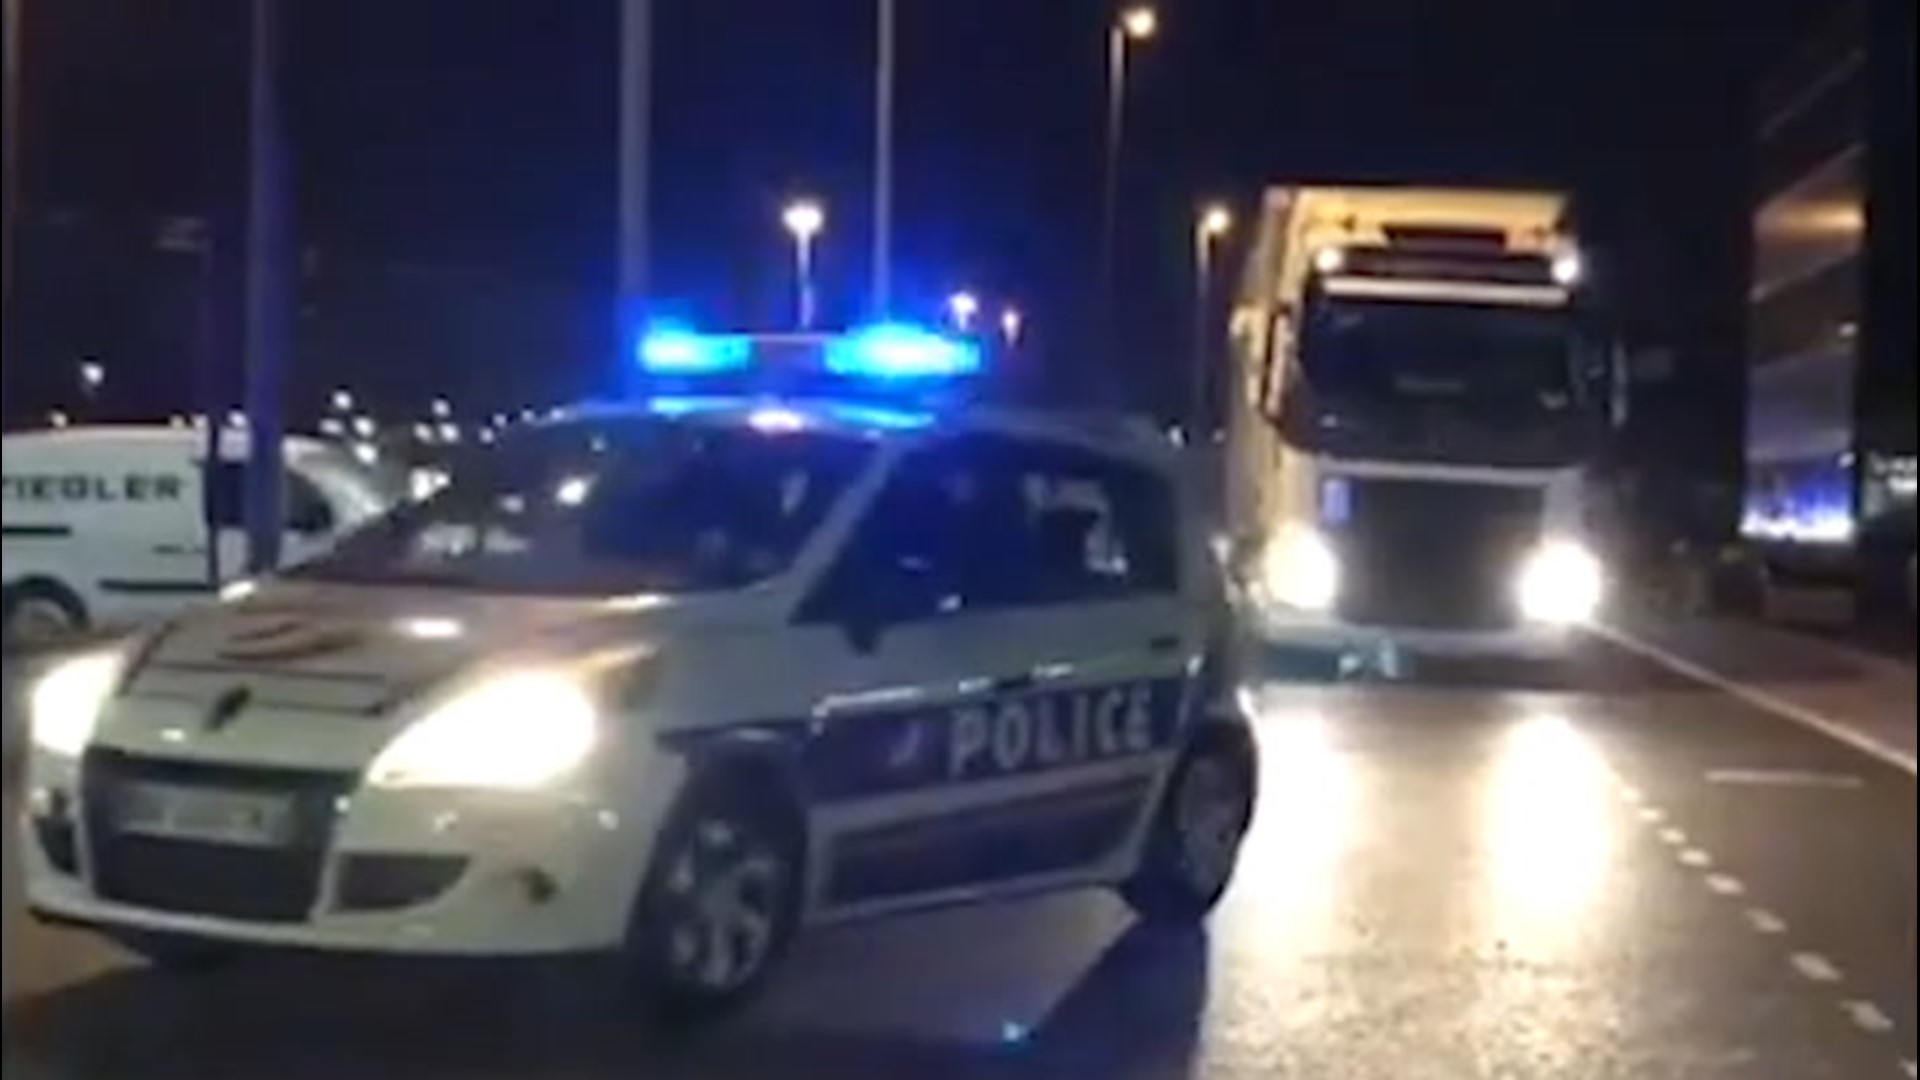 Trucks carrying medical supplies to help those who have contracted COVID-19 were given a police escort in Paris, France, on April 2.